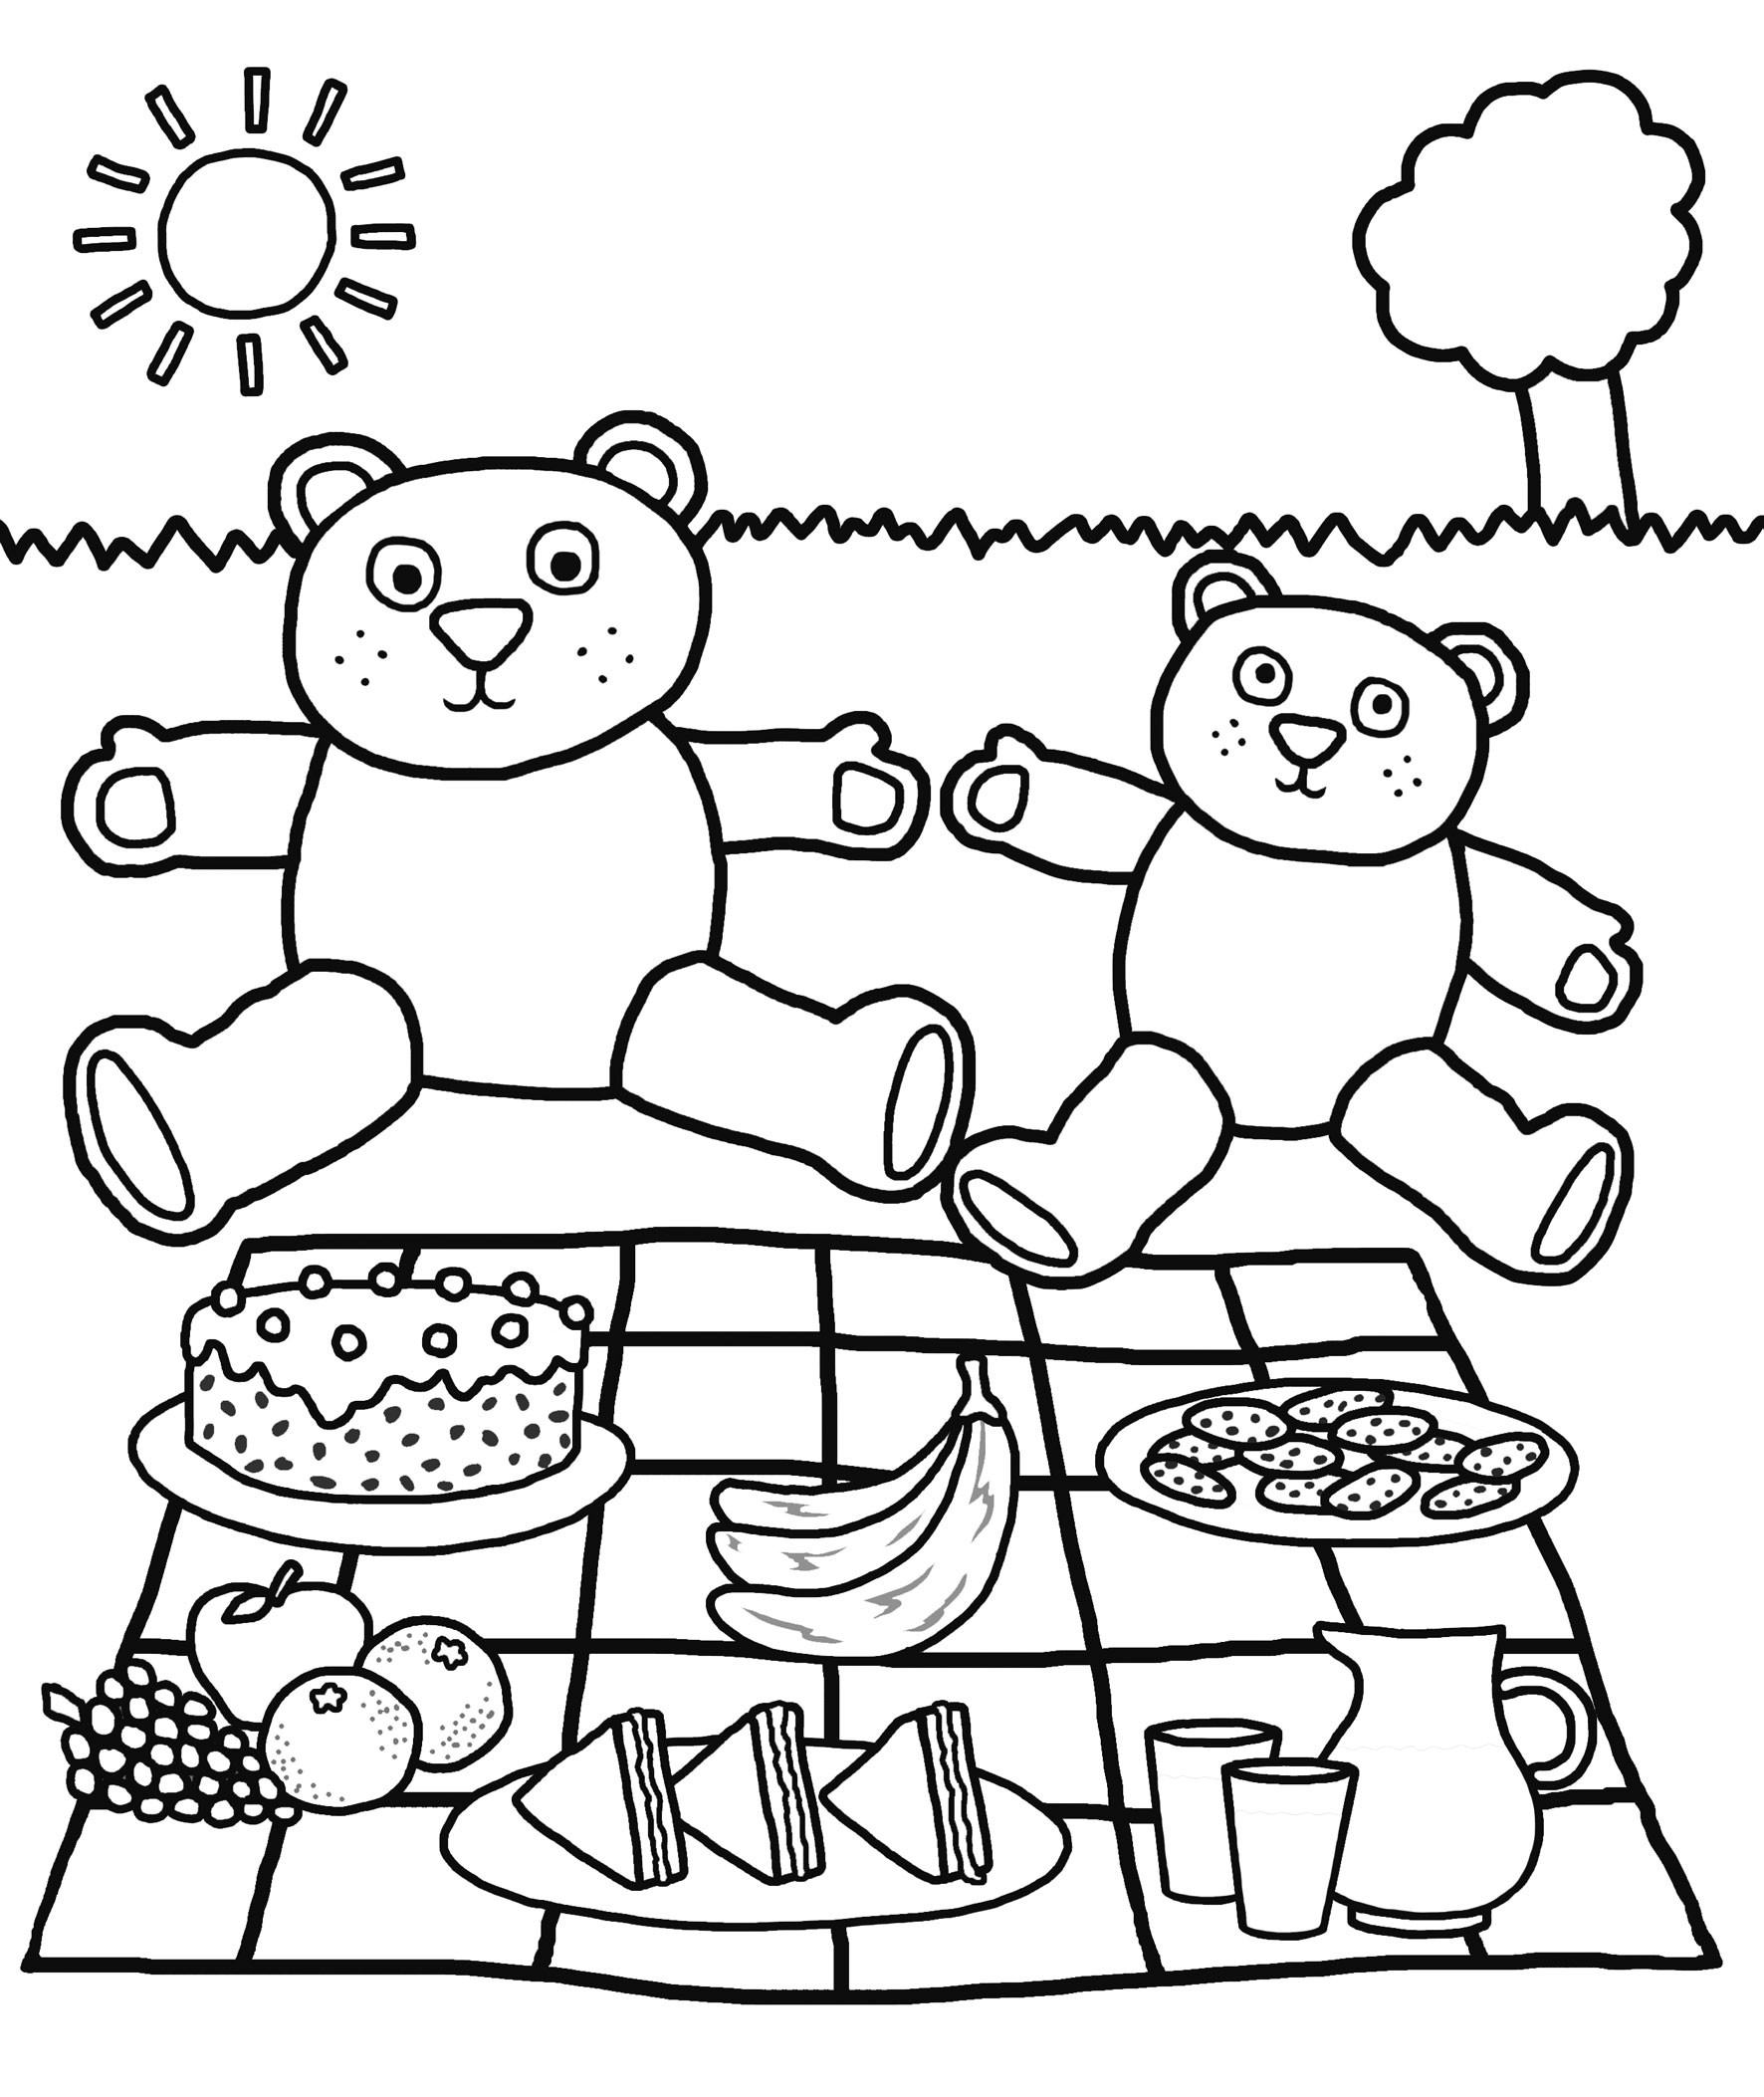 Coloring Pages For Preschoolers Printable
 Free Printable Kindergarten Coloring Pages For Kids